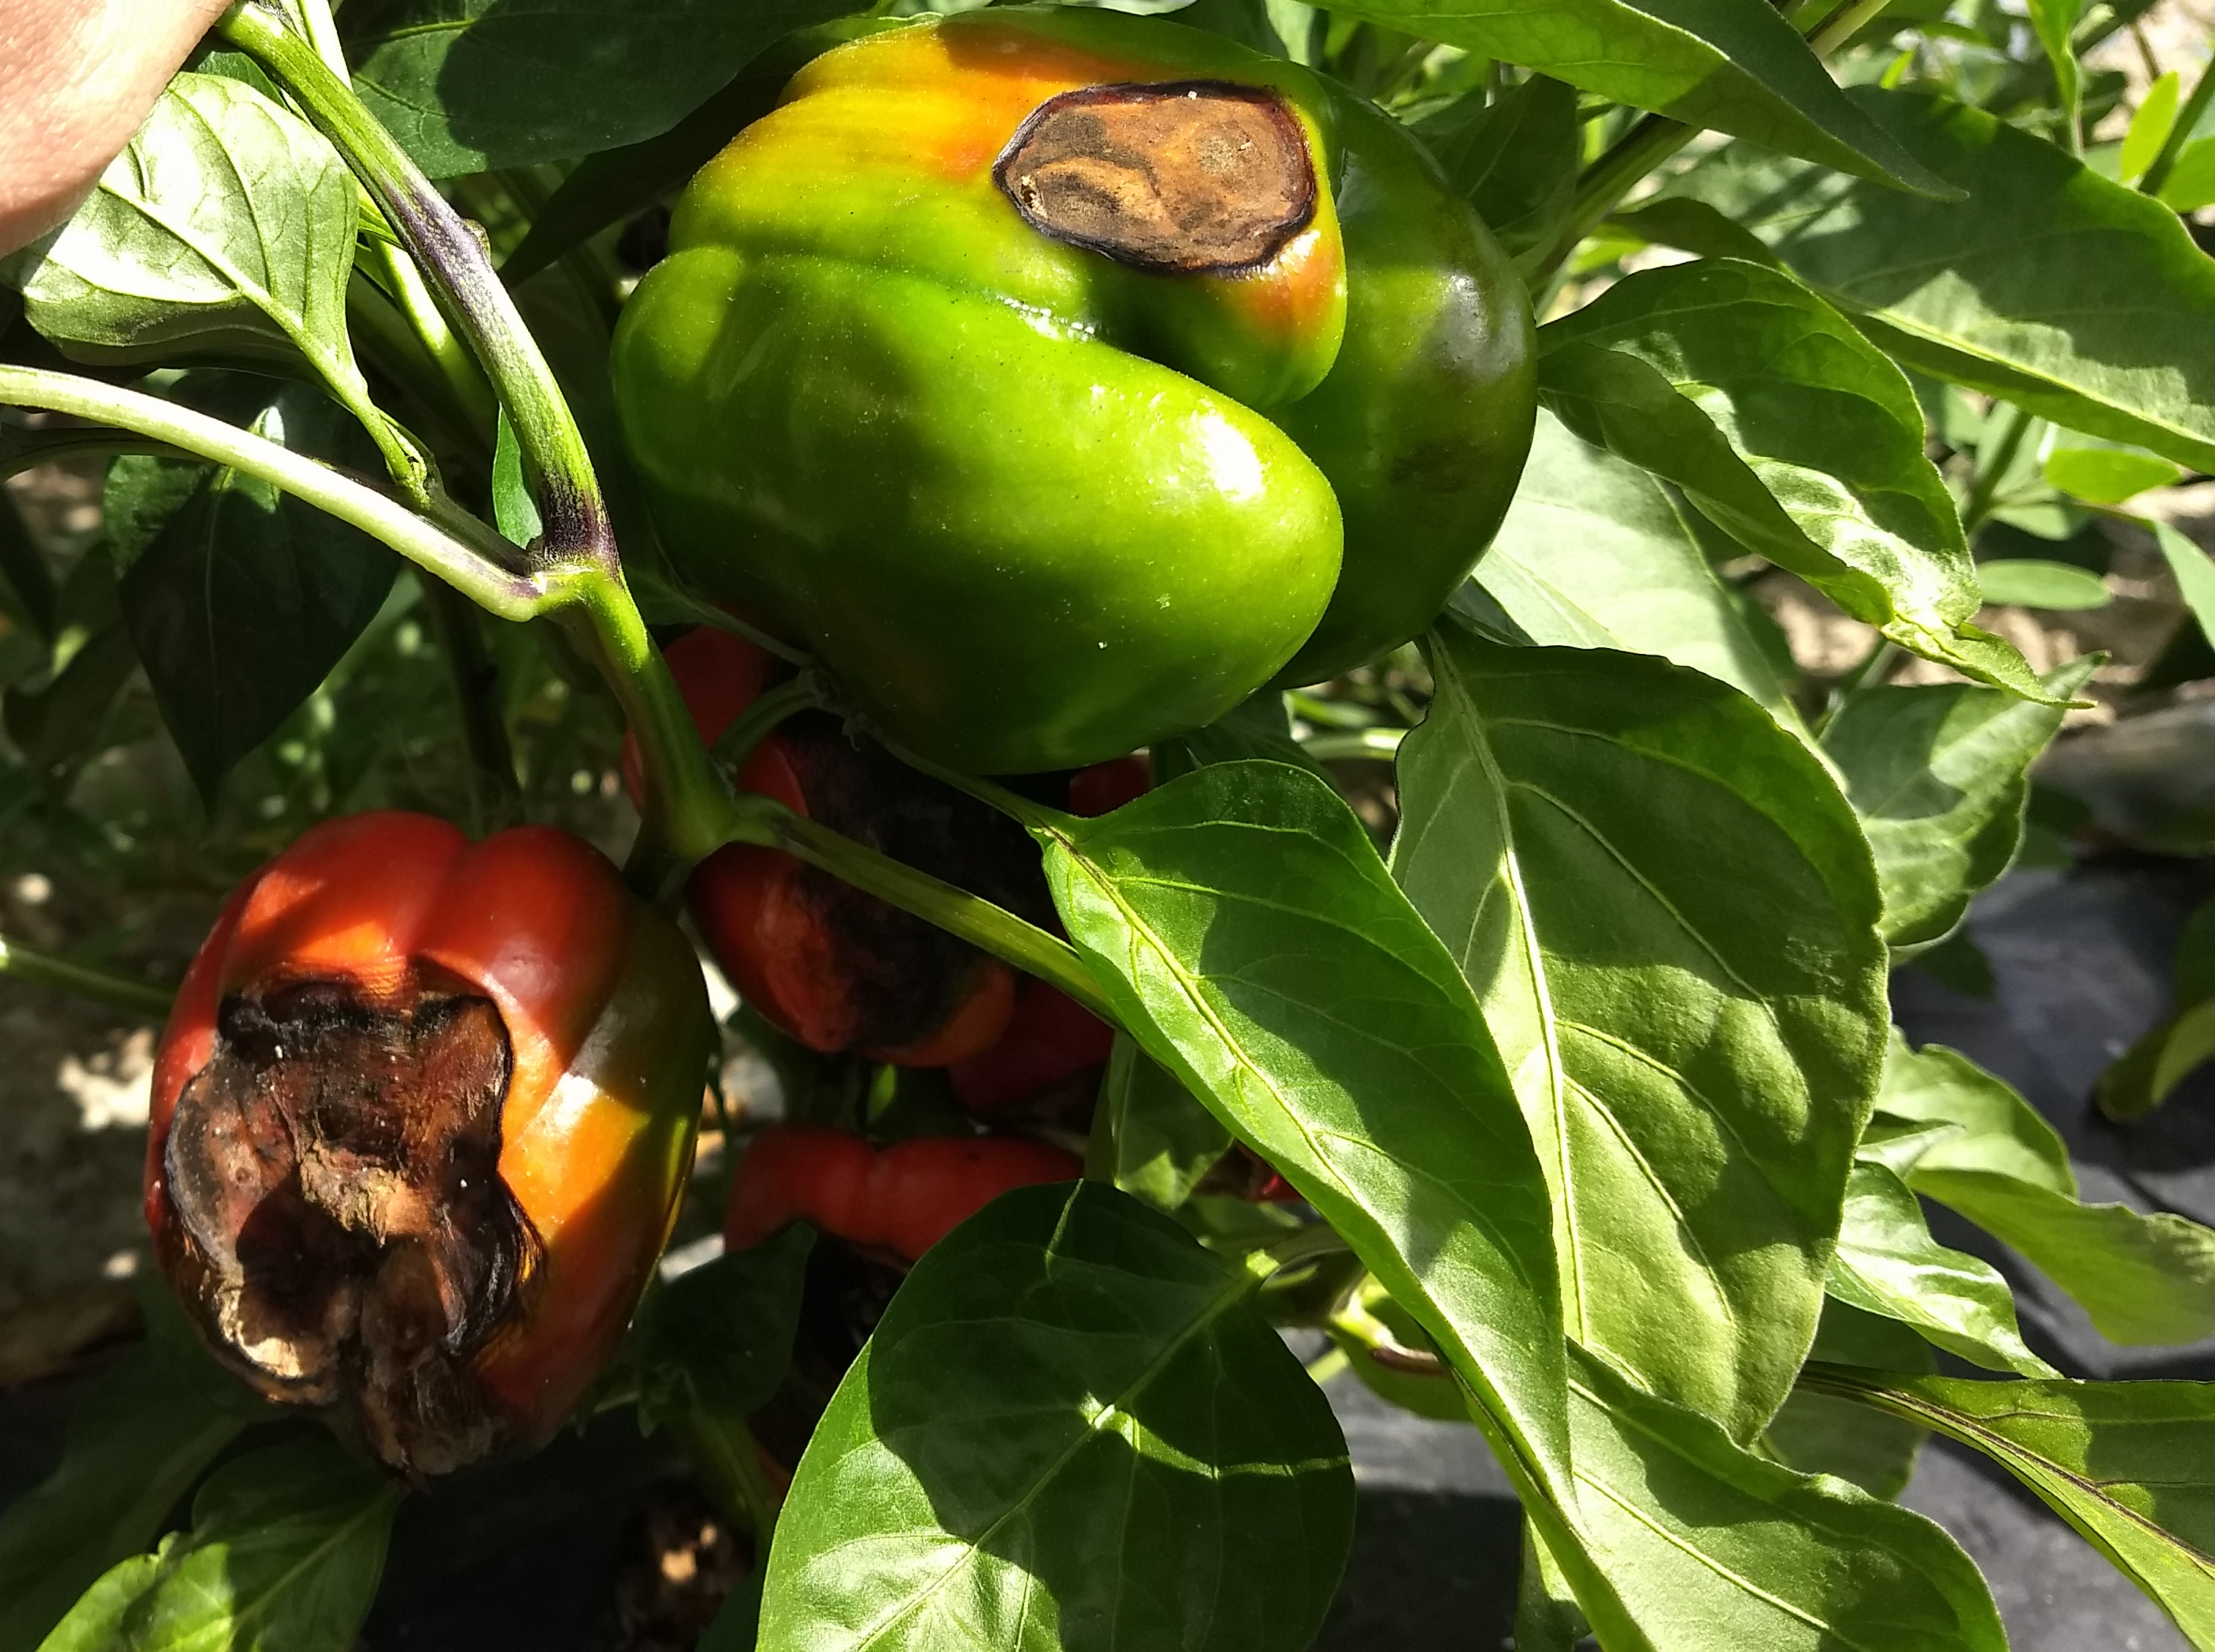 Blossom end rot, sunscald, and Anthracnose in bell peppers are confusing to tell apart.